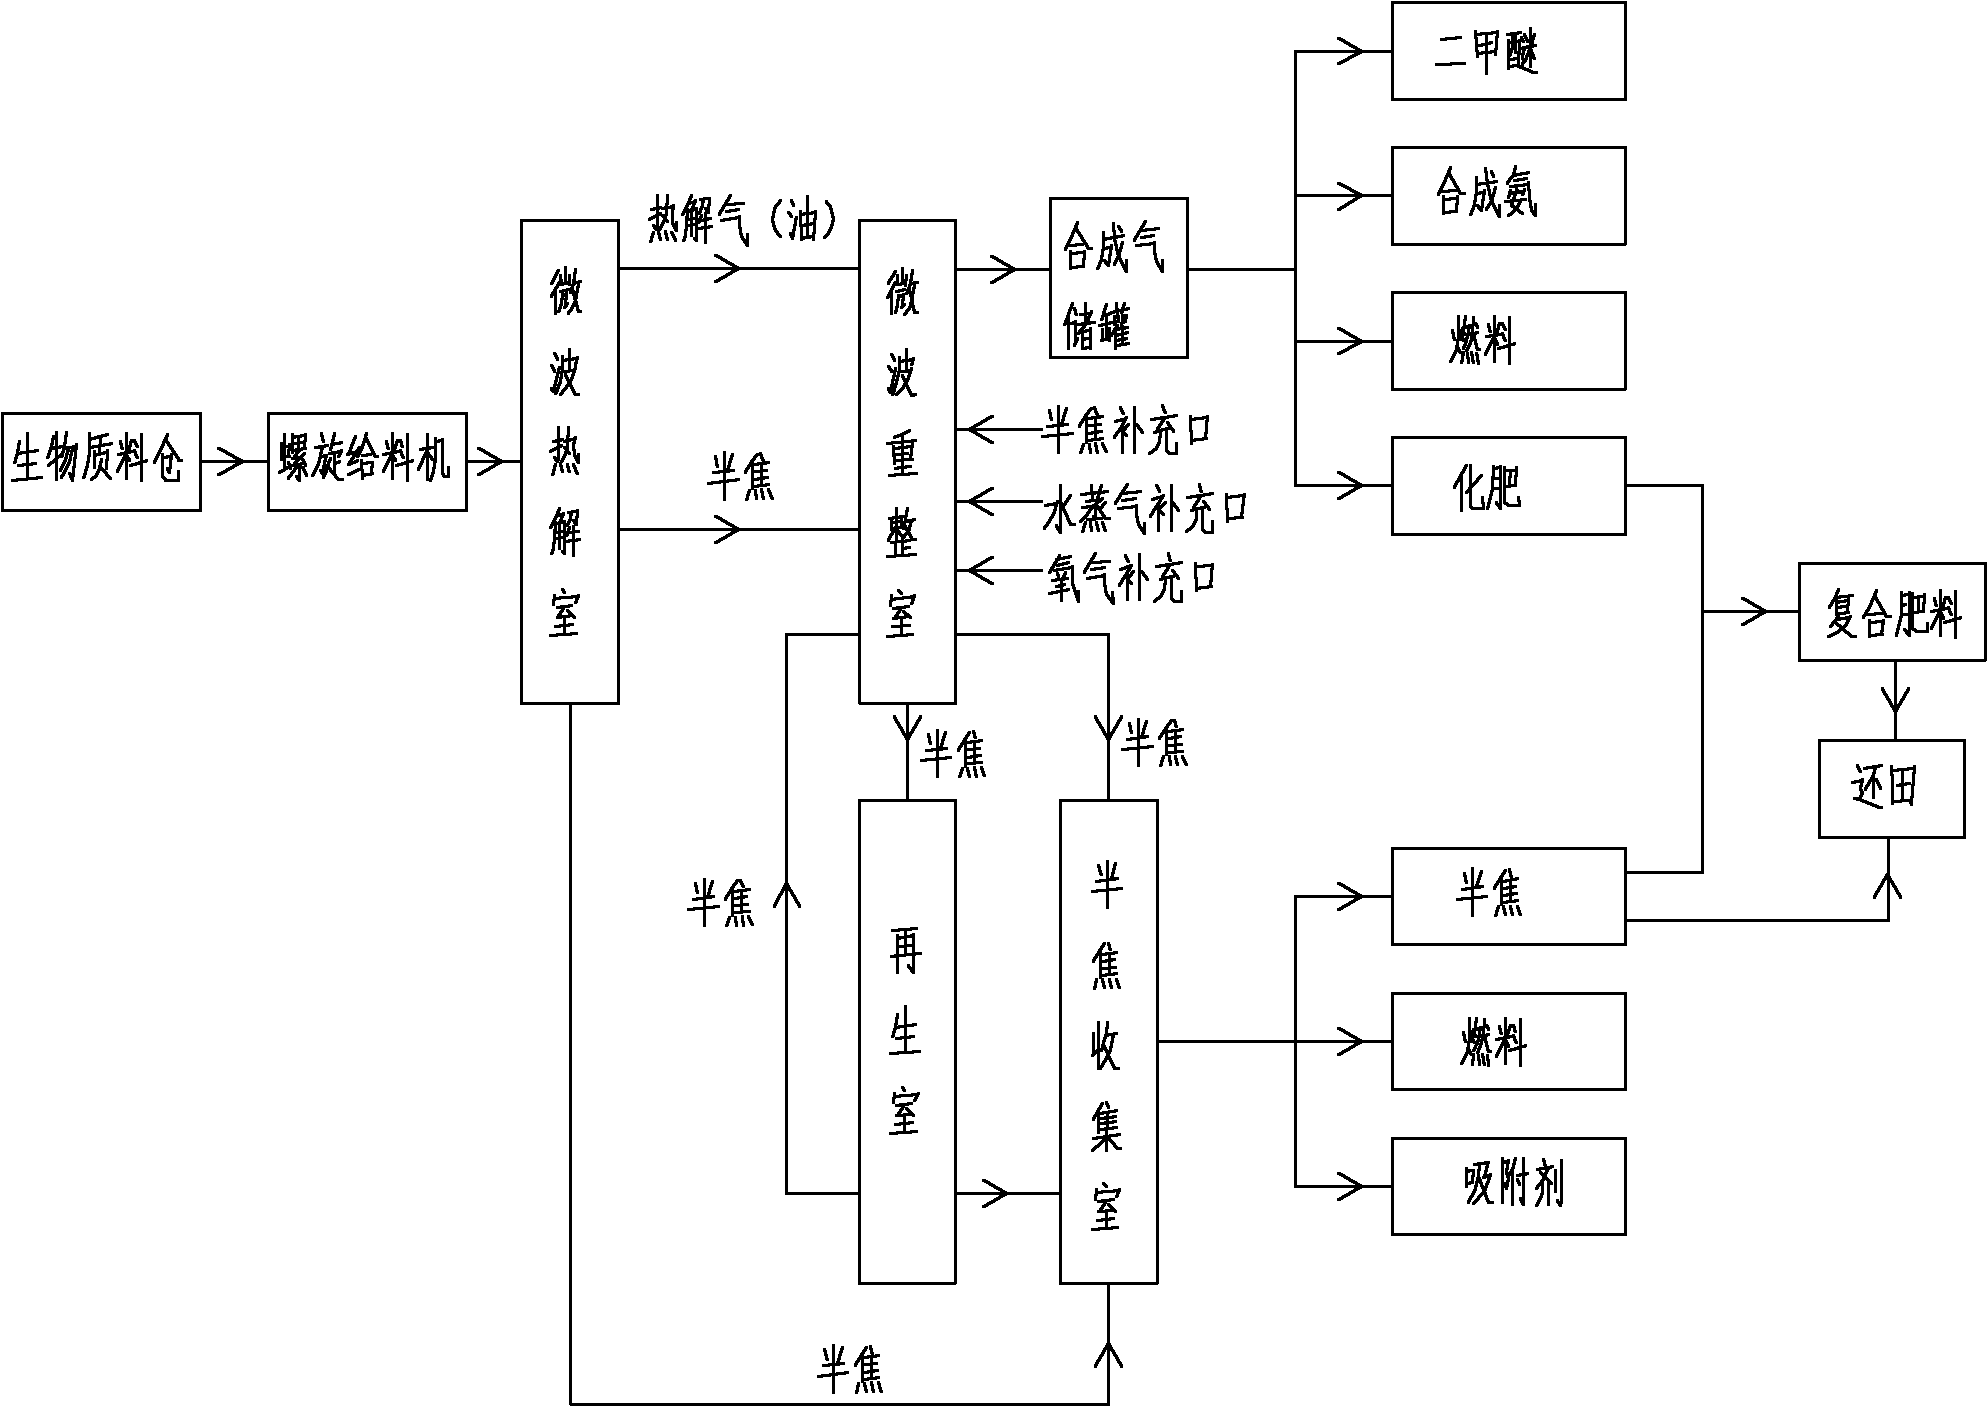 Biomass poly-generation comprehensive utilization method and device